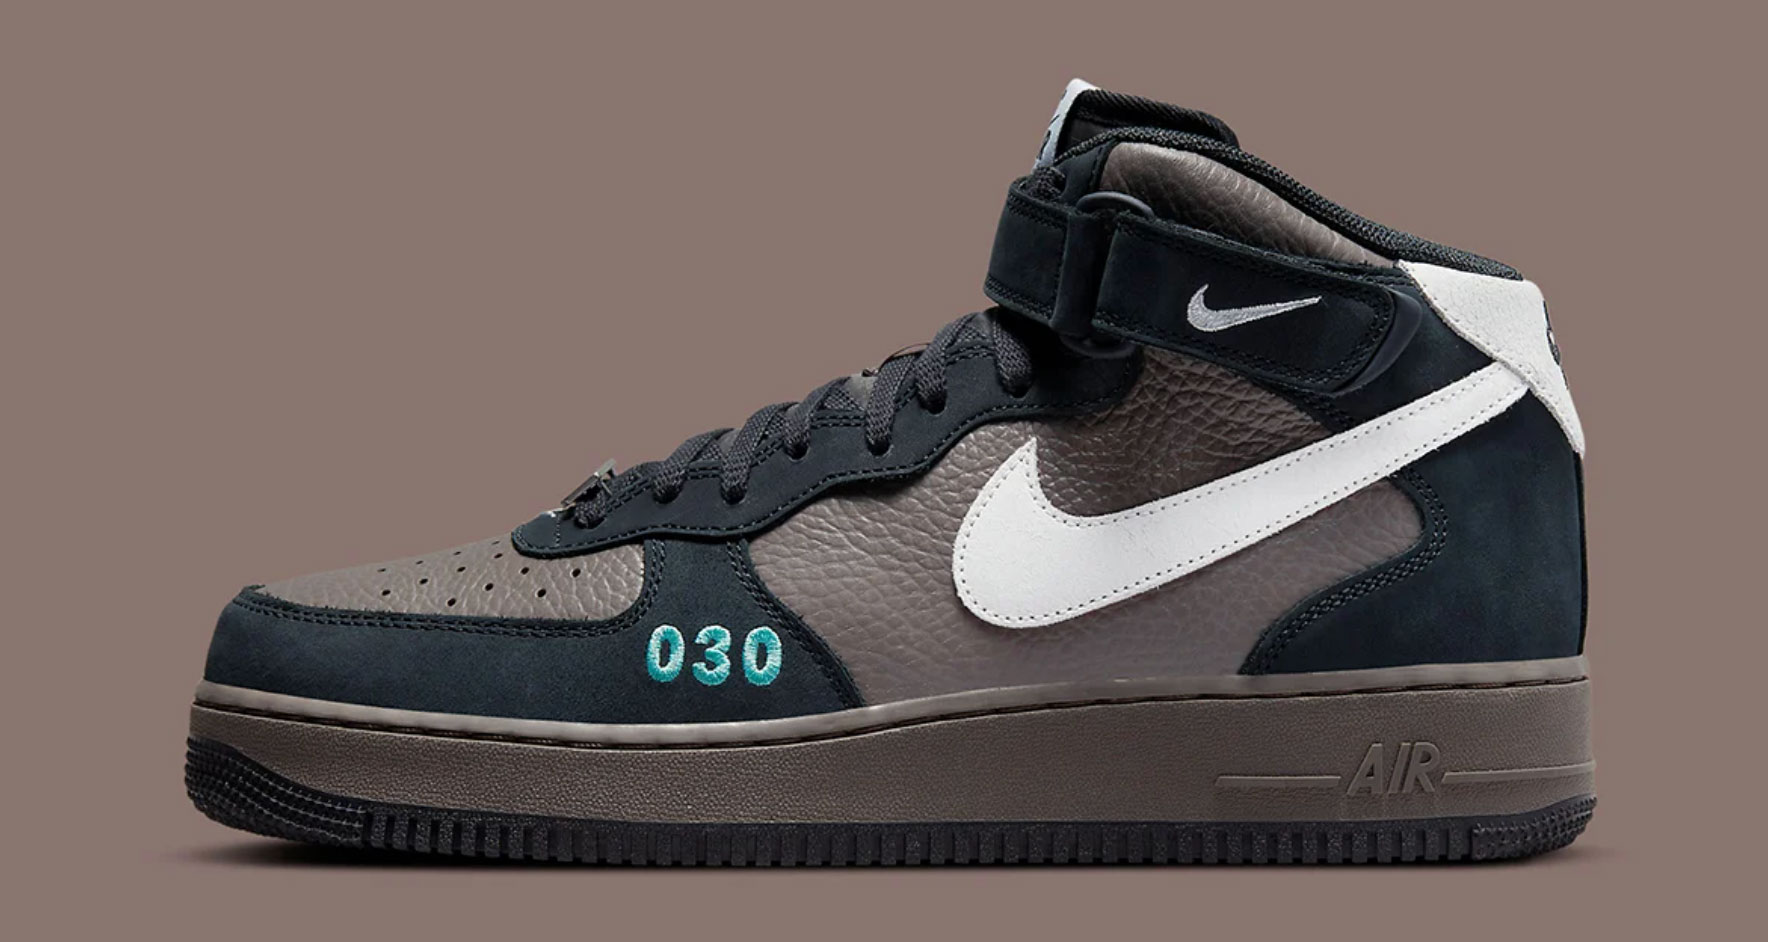 Where to buy Nike Air Force 1 Mid “Plaid” shoes? Price and more